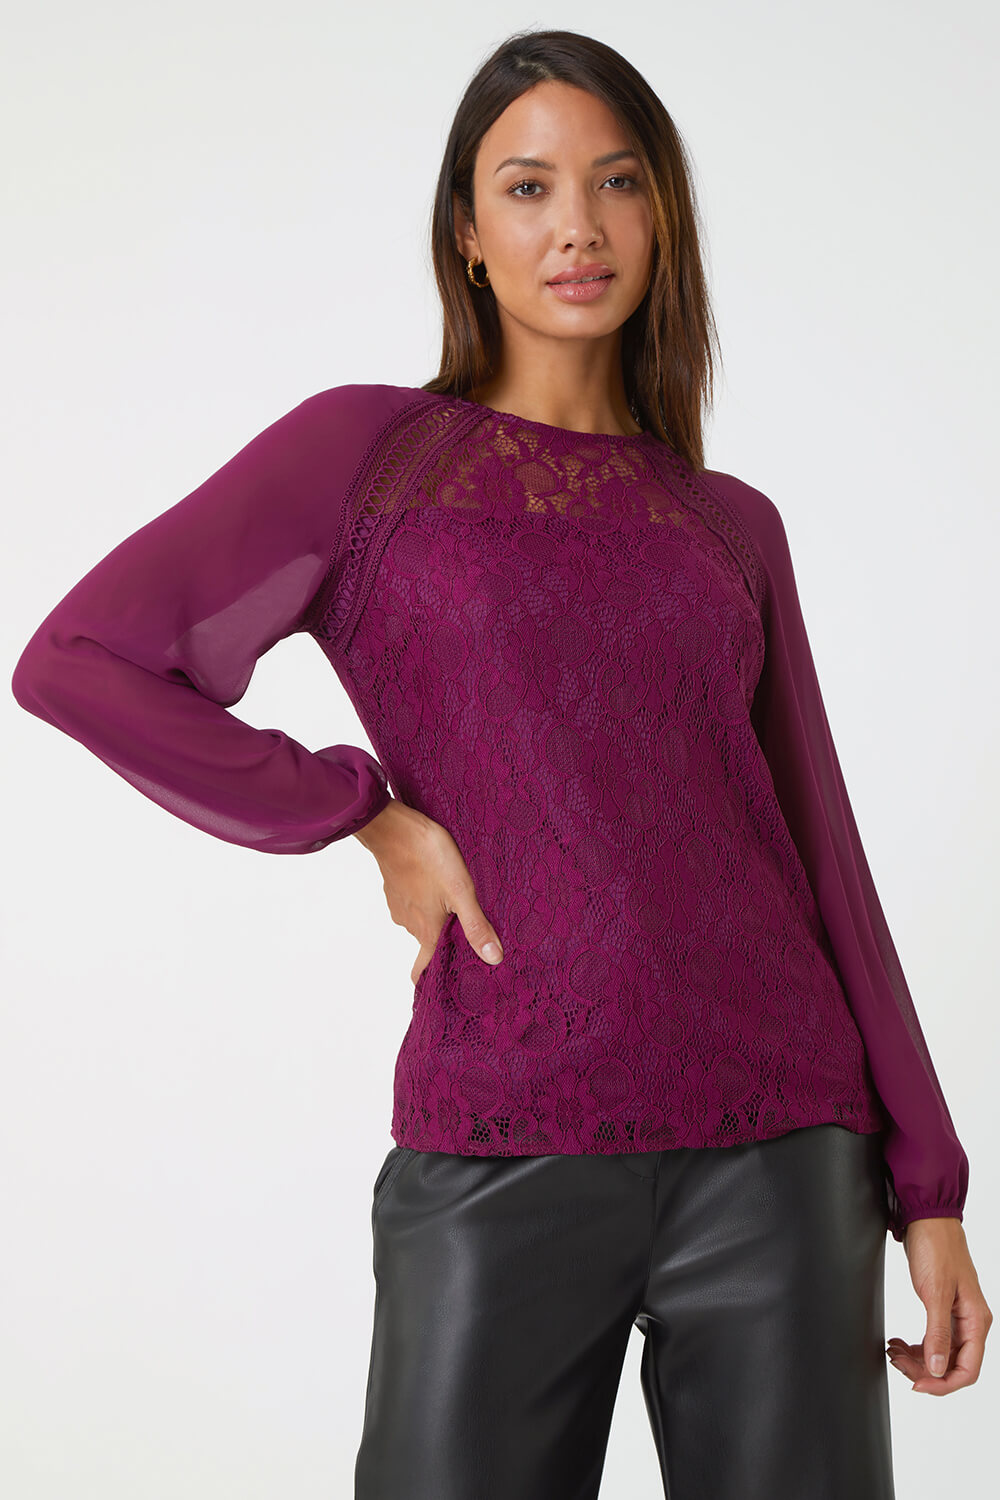 Lace Detail Chiffon Sleeve Stretch Top